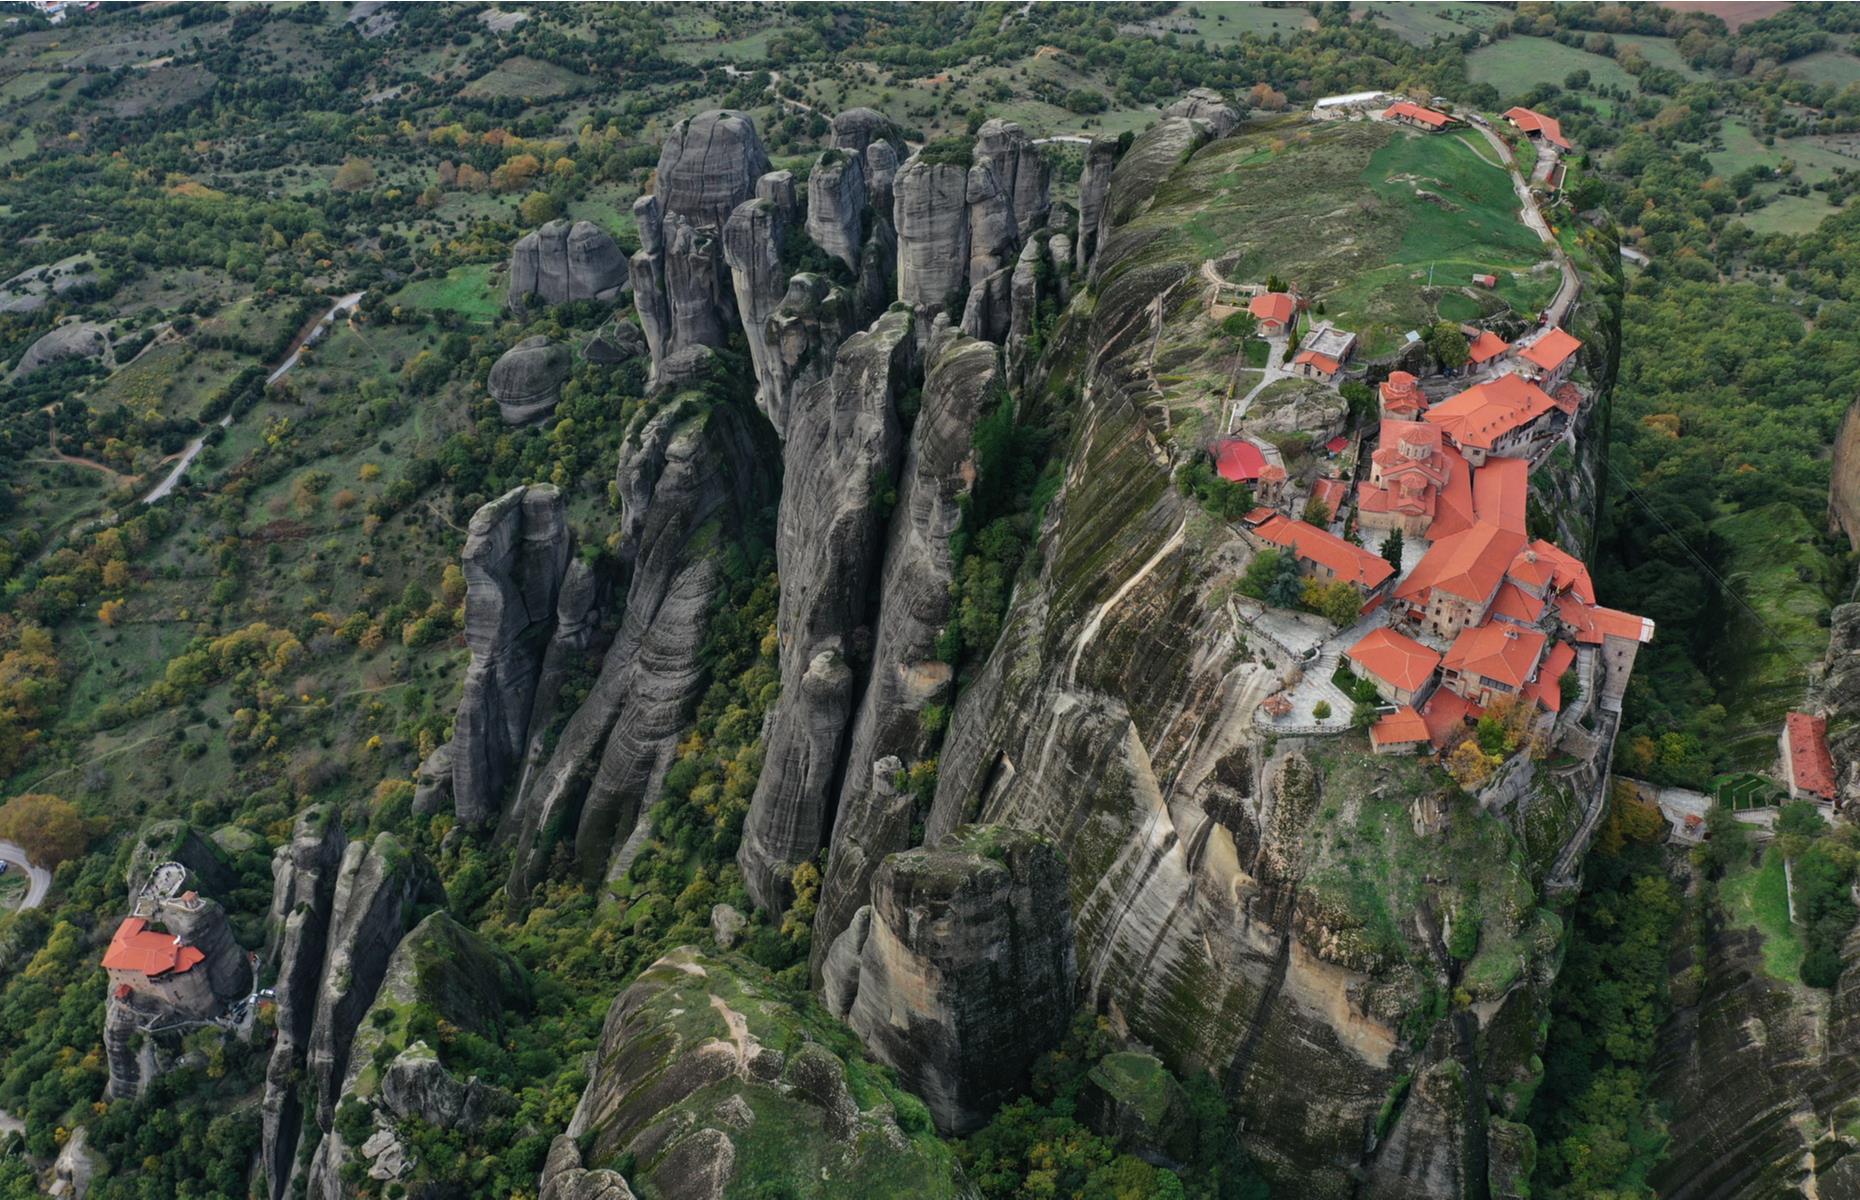 Perched on top of vertiginous sandstone pillars and boulders, the six Eastern Orthodox monasteries found in the plains of Thessaly, northwest of Kalabaka, have inspired visitors for centuries. In this awe-inspiring photograph, the monasteries’ precarious position and the cliffs’ impressive geology are enhanced by a drone’s-eye view.